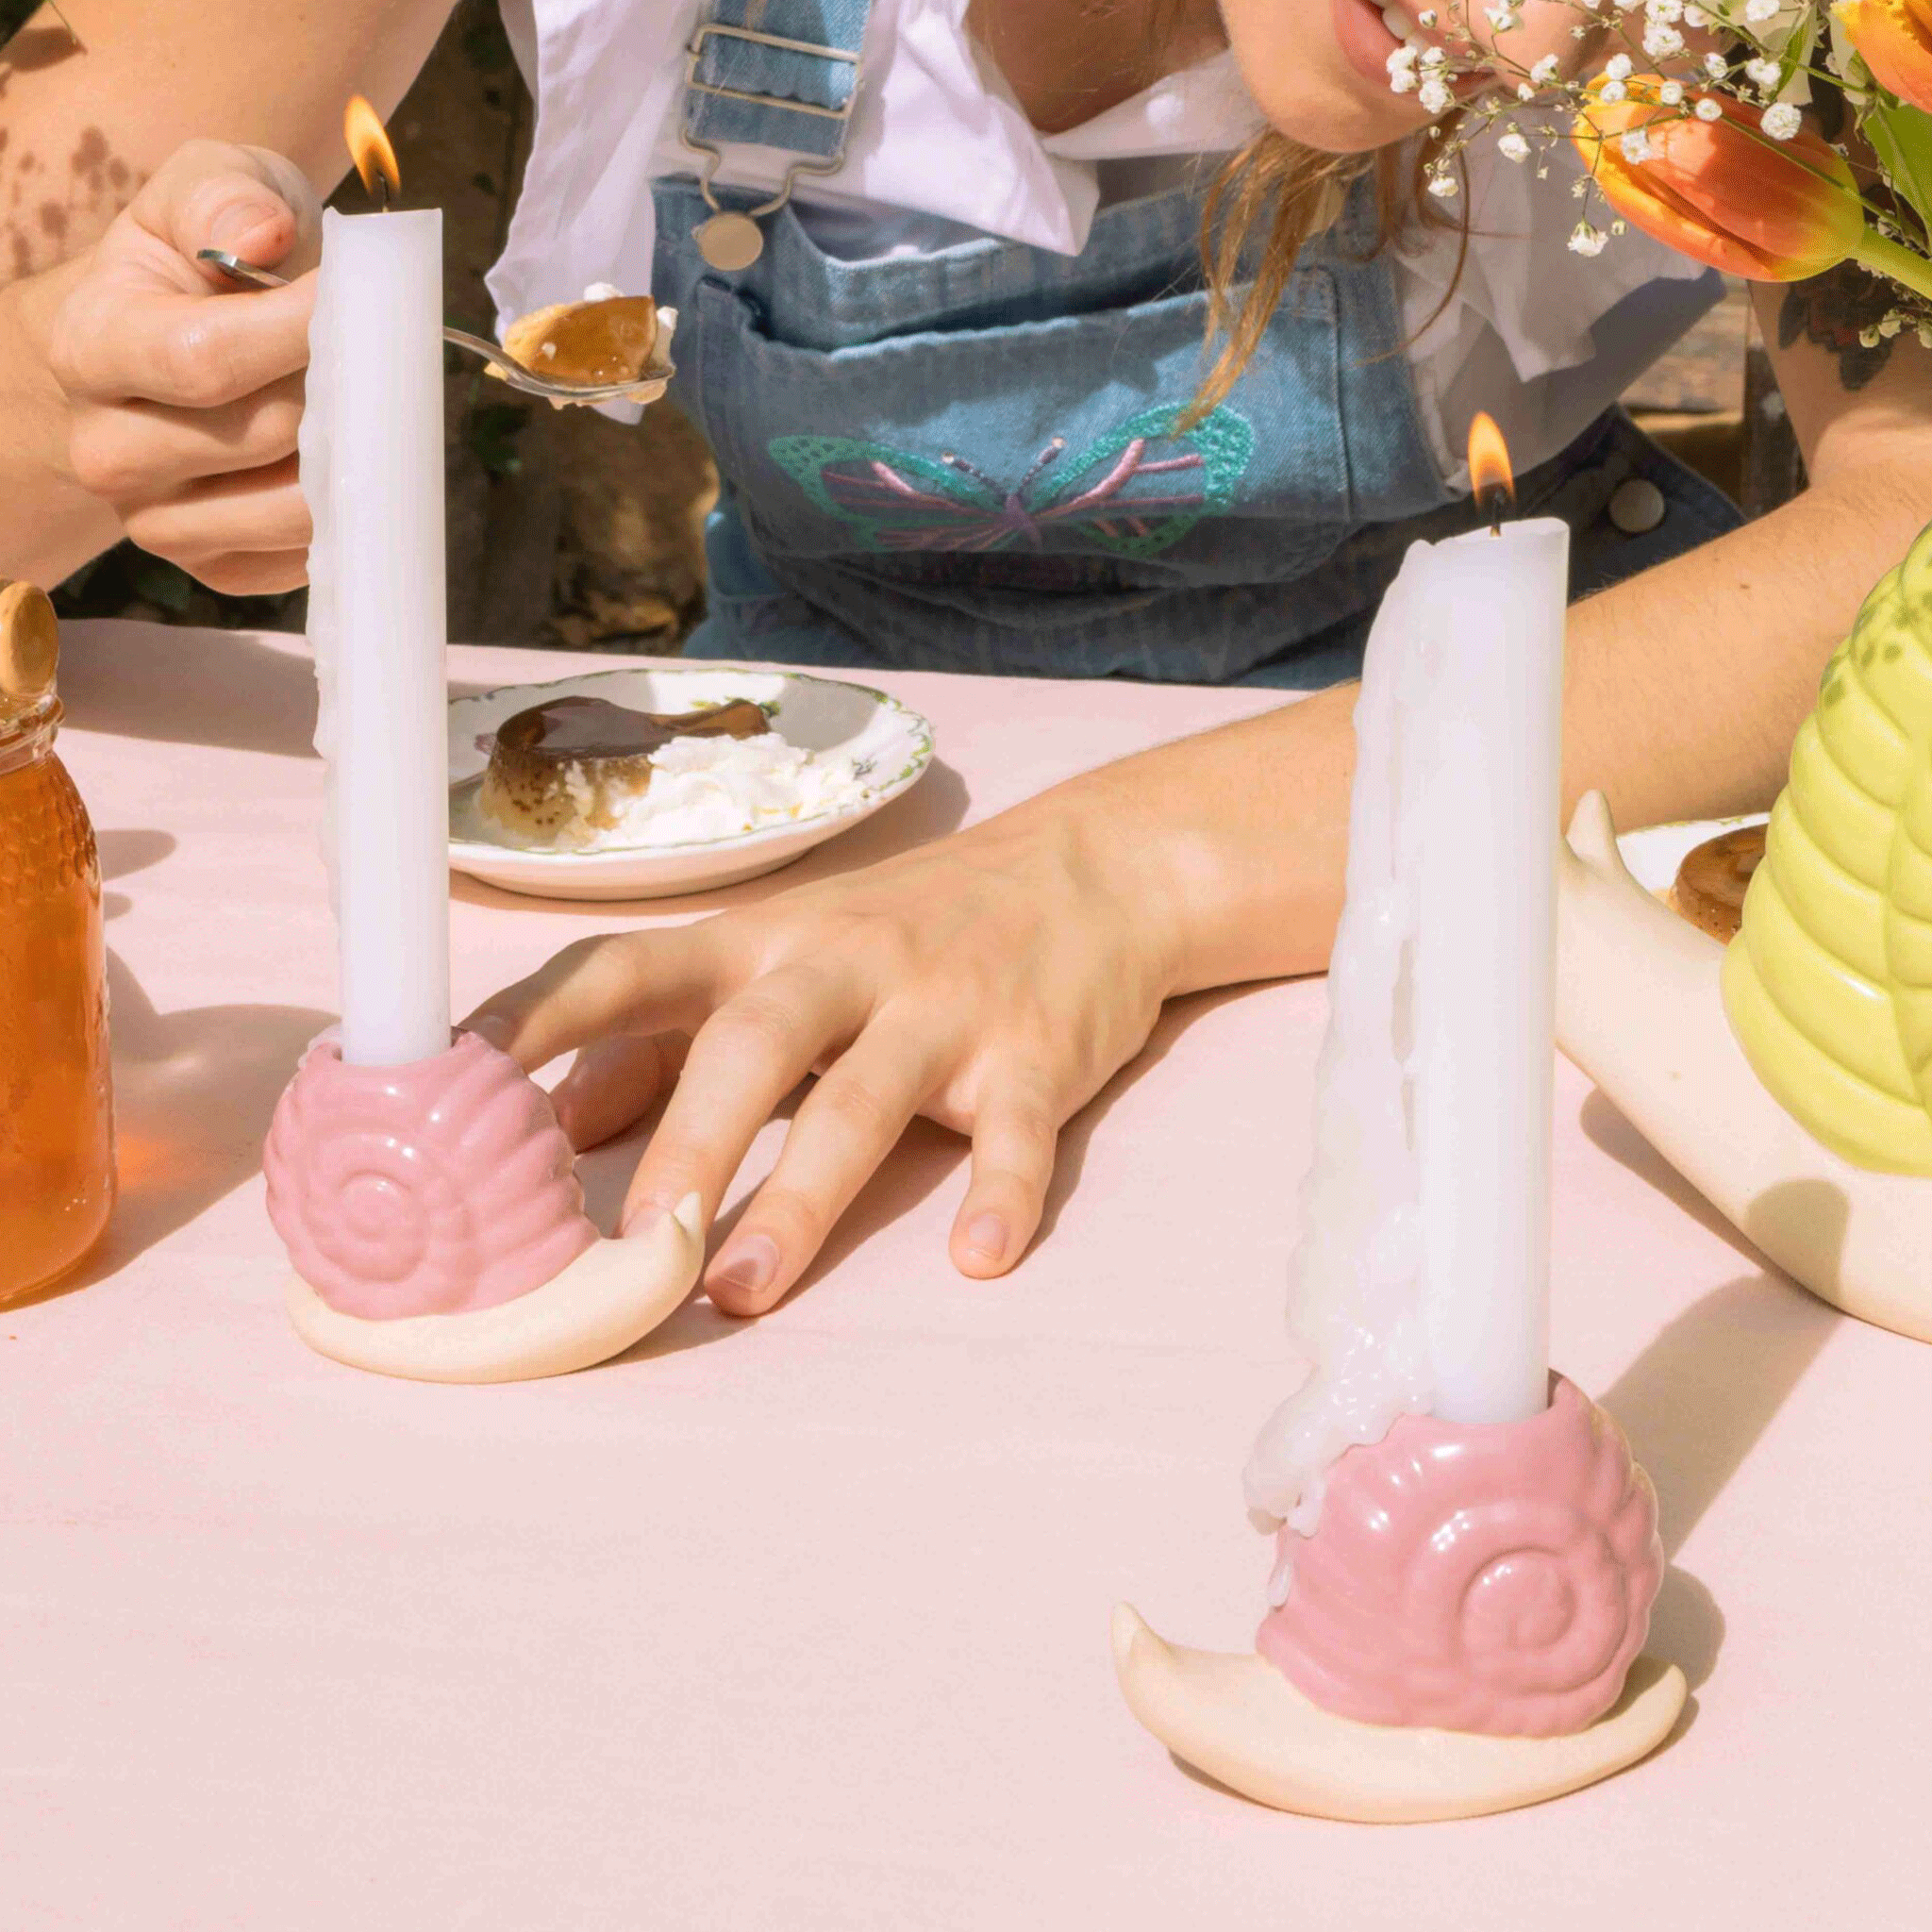 A photo of a table scape with the pink snail shaped candle holder.